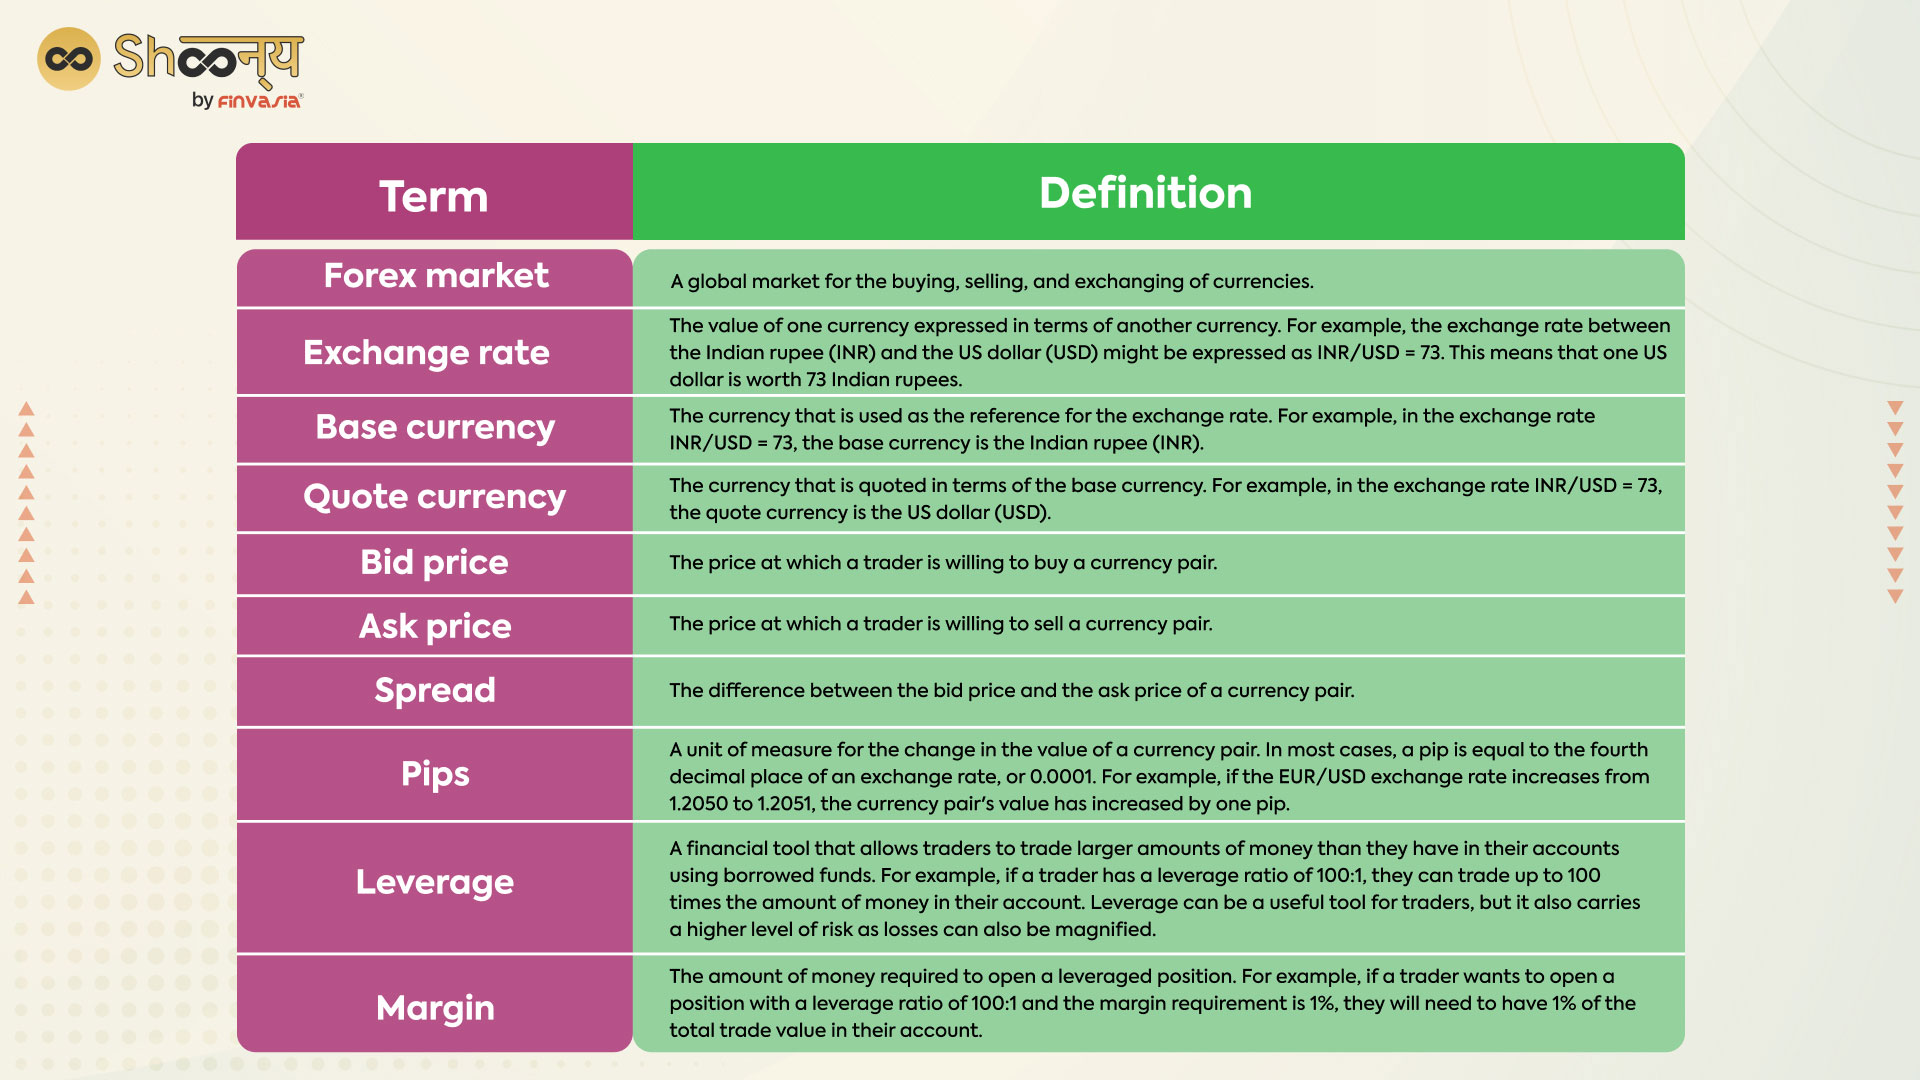 Standard Terms related to Currency Market and Currency Trading